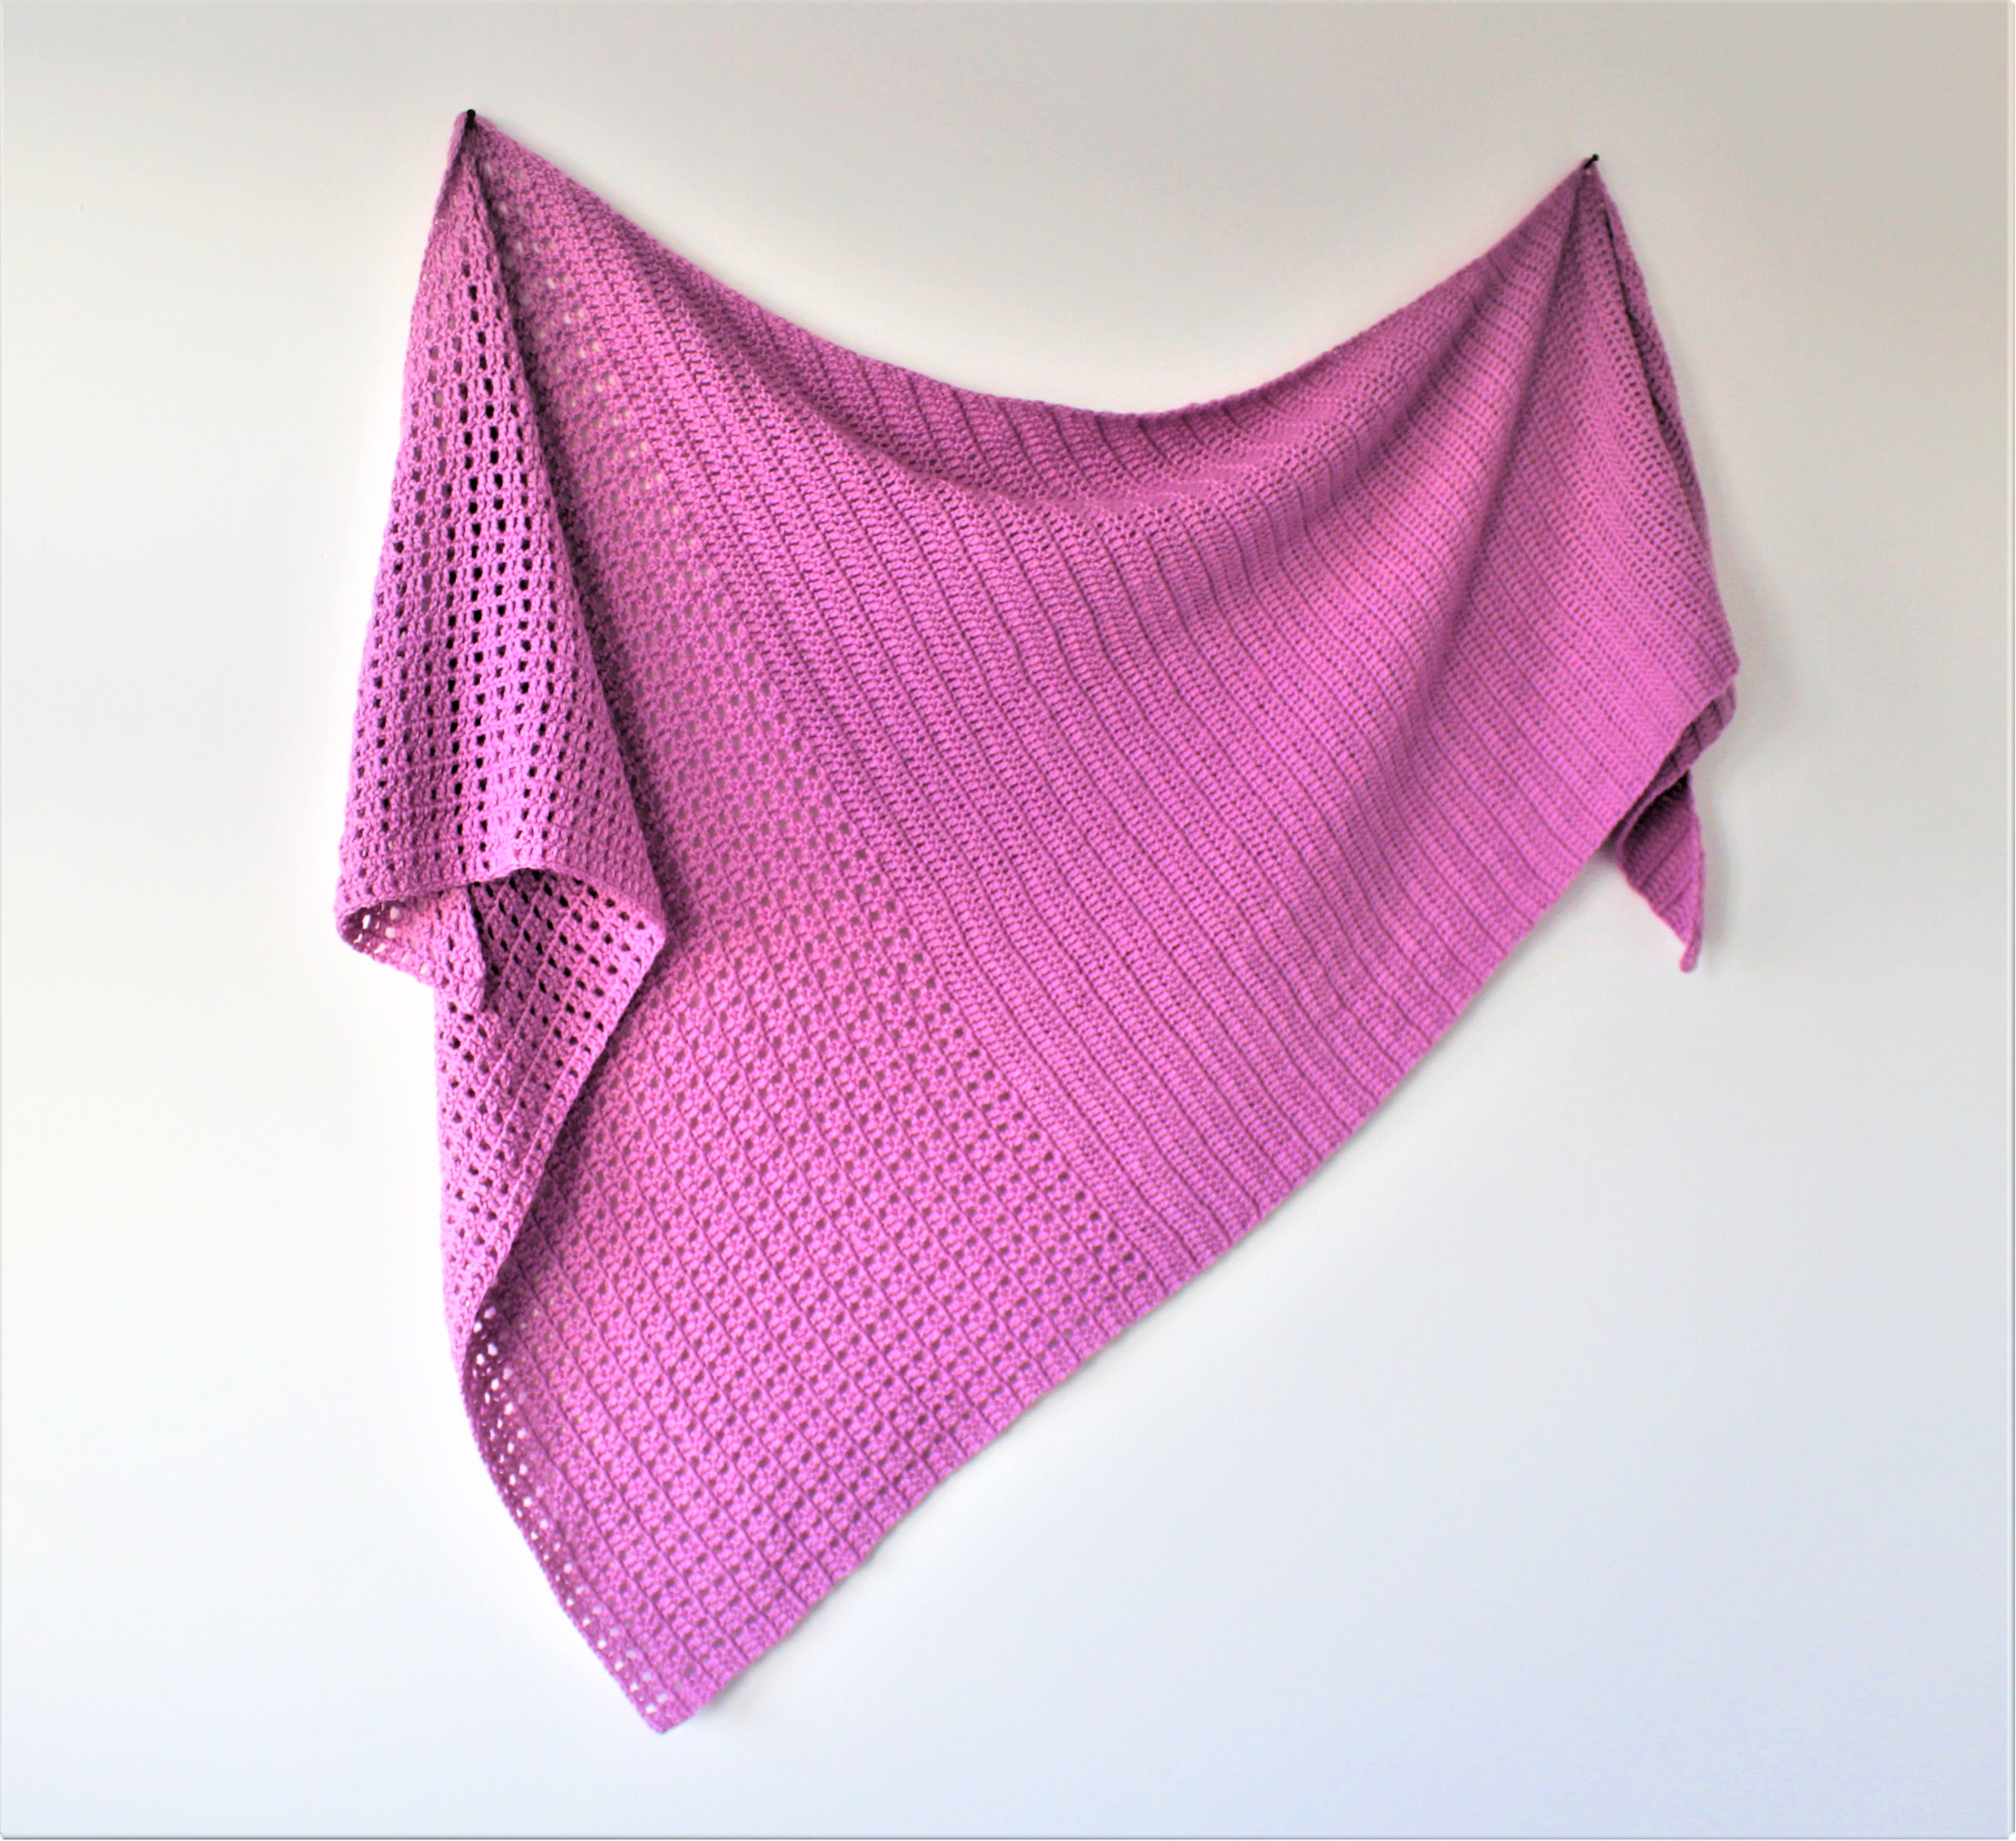 Different angle of the shawl